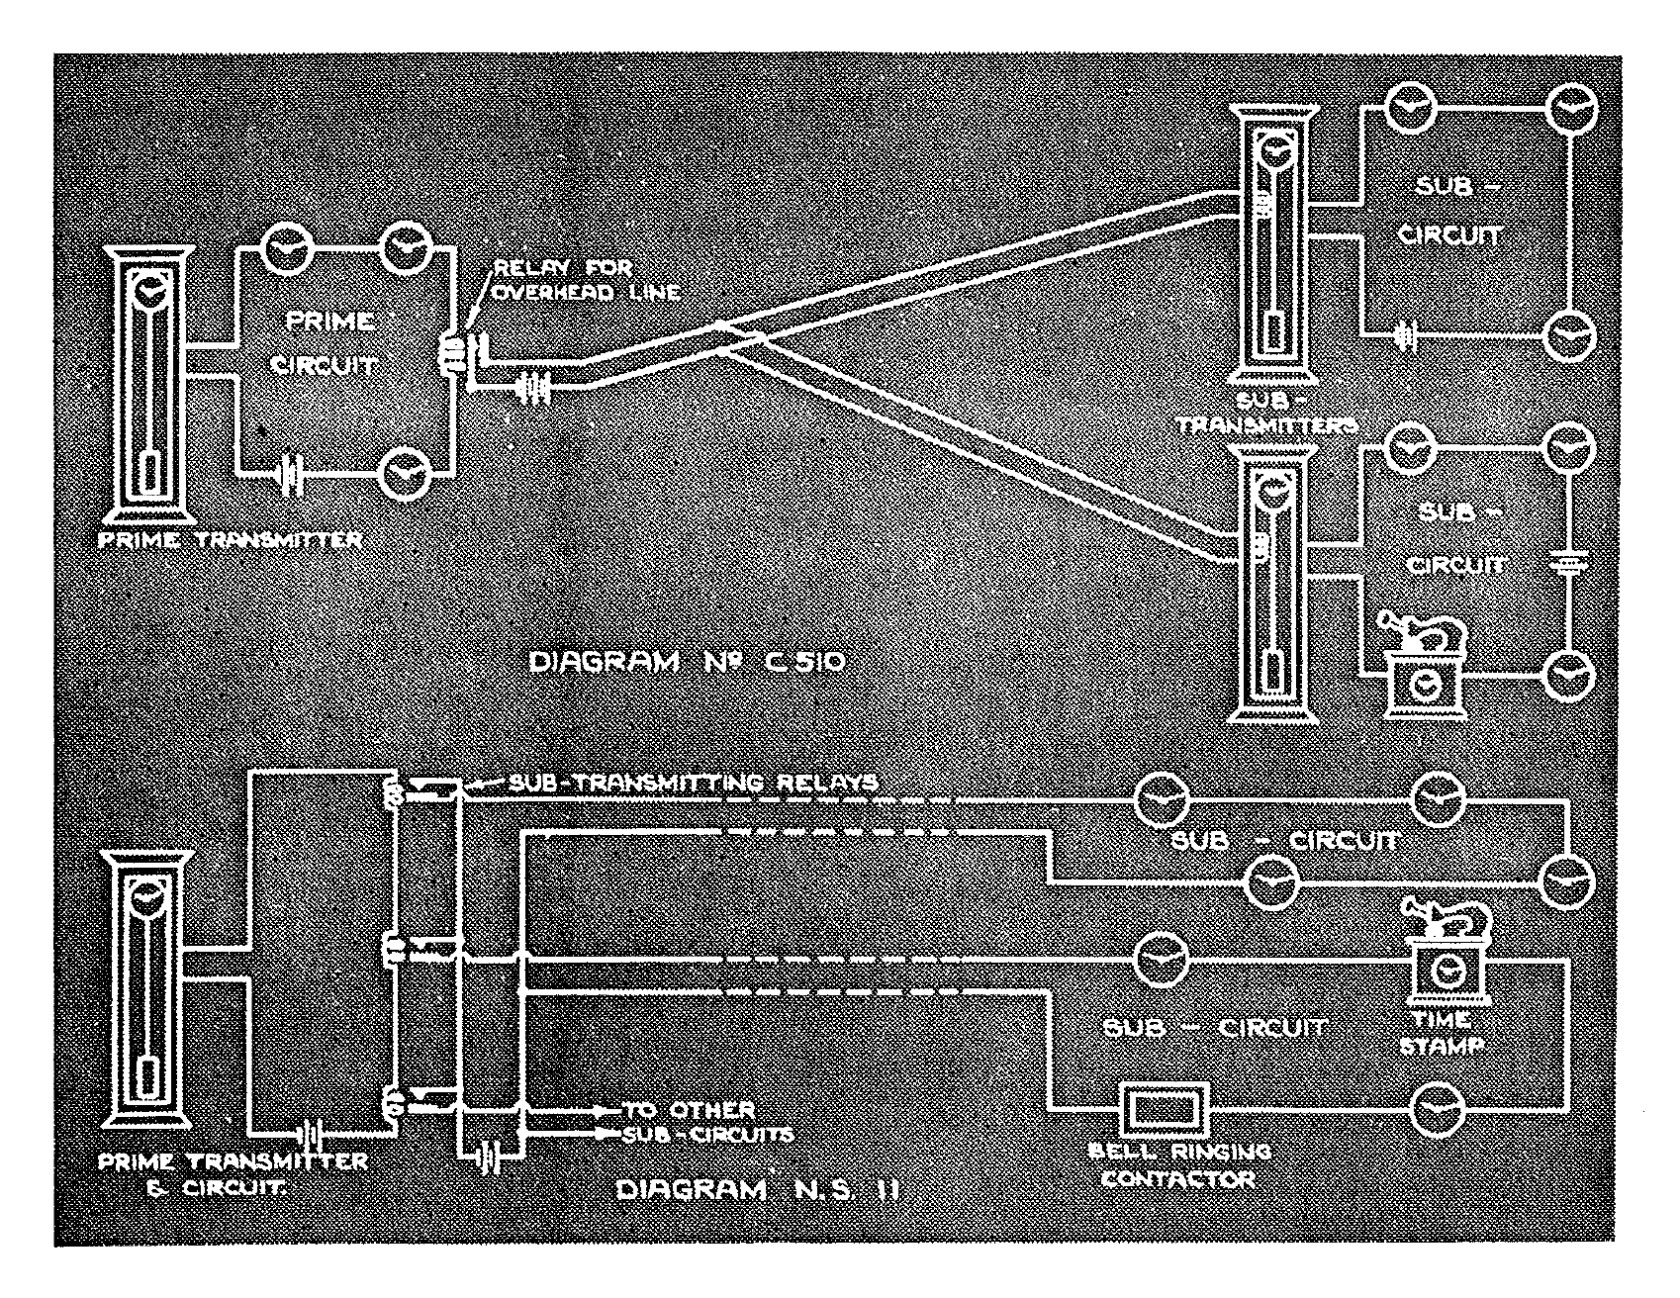 Gents' of Leicester Sub Control Relay Transmitters Diagram C510 and NS 11